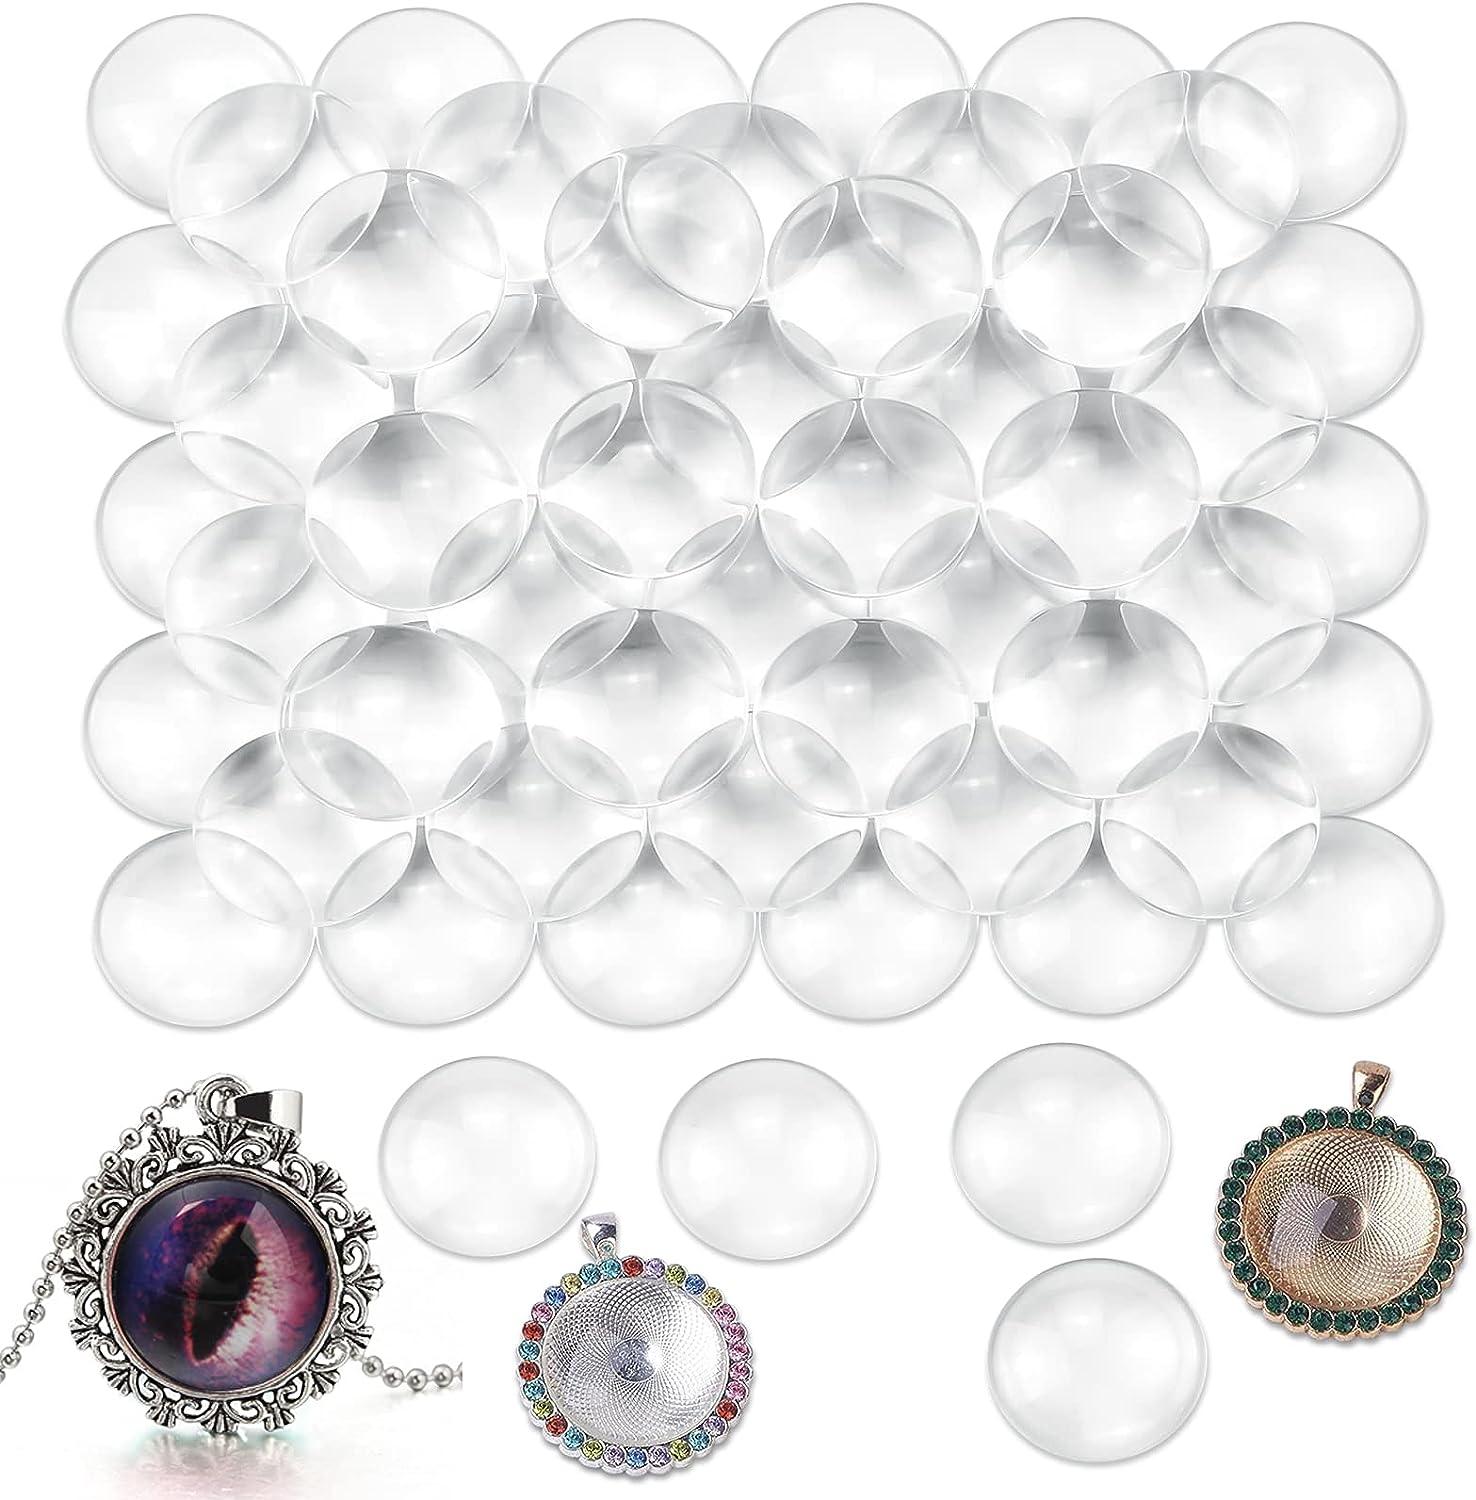 Acmer 100 Pieces Transparent Glass cabochons Clear Glass Dome cabochon  Non-calibrated Round 1 inch/25mm